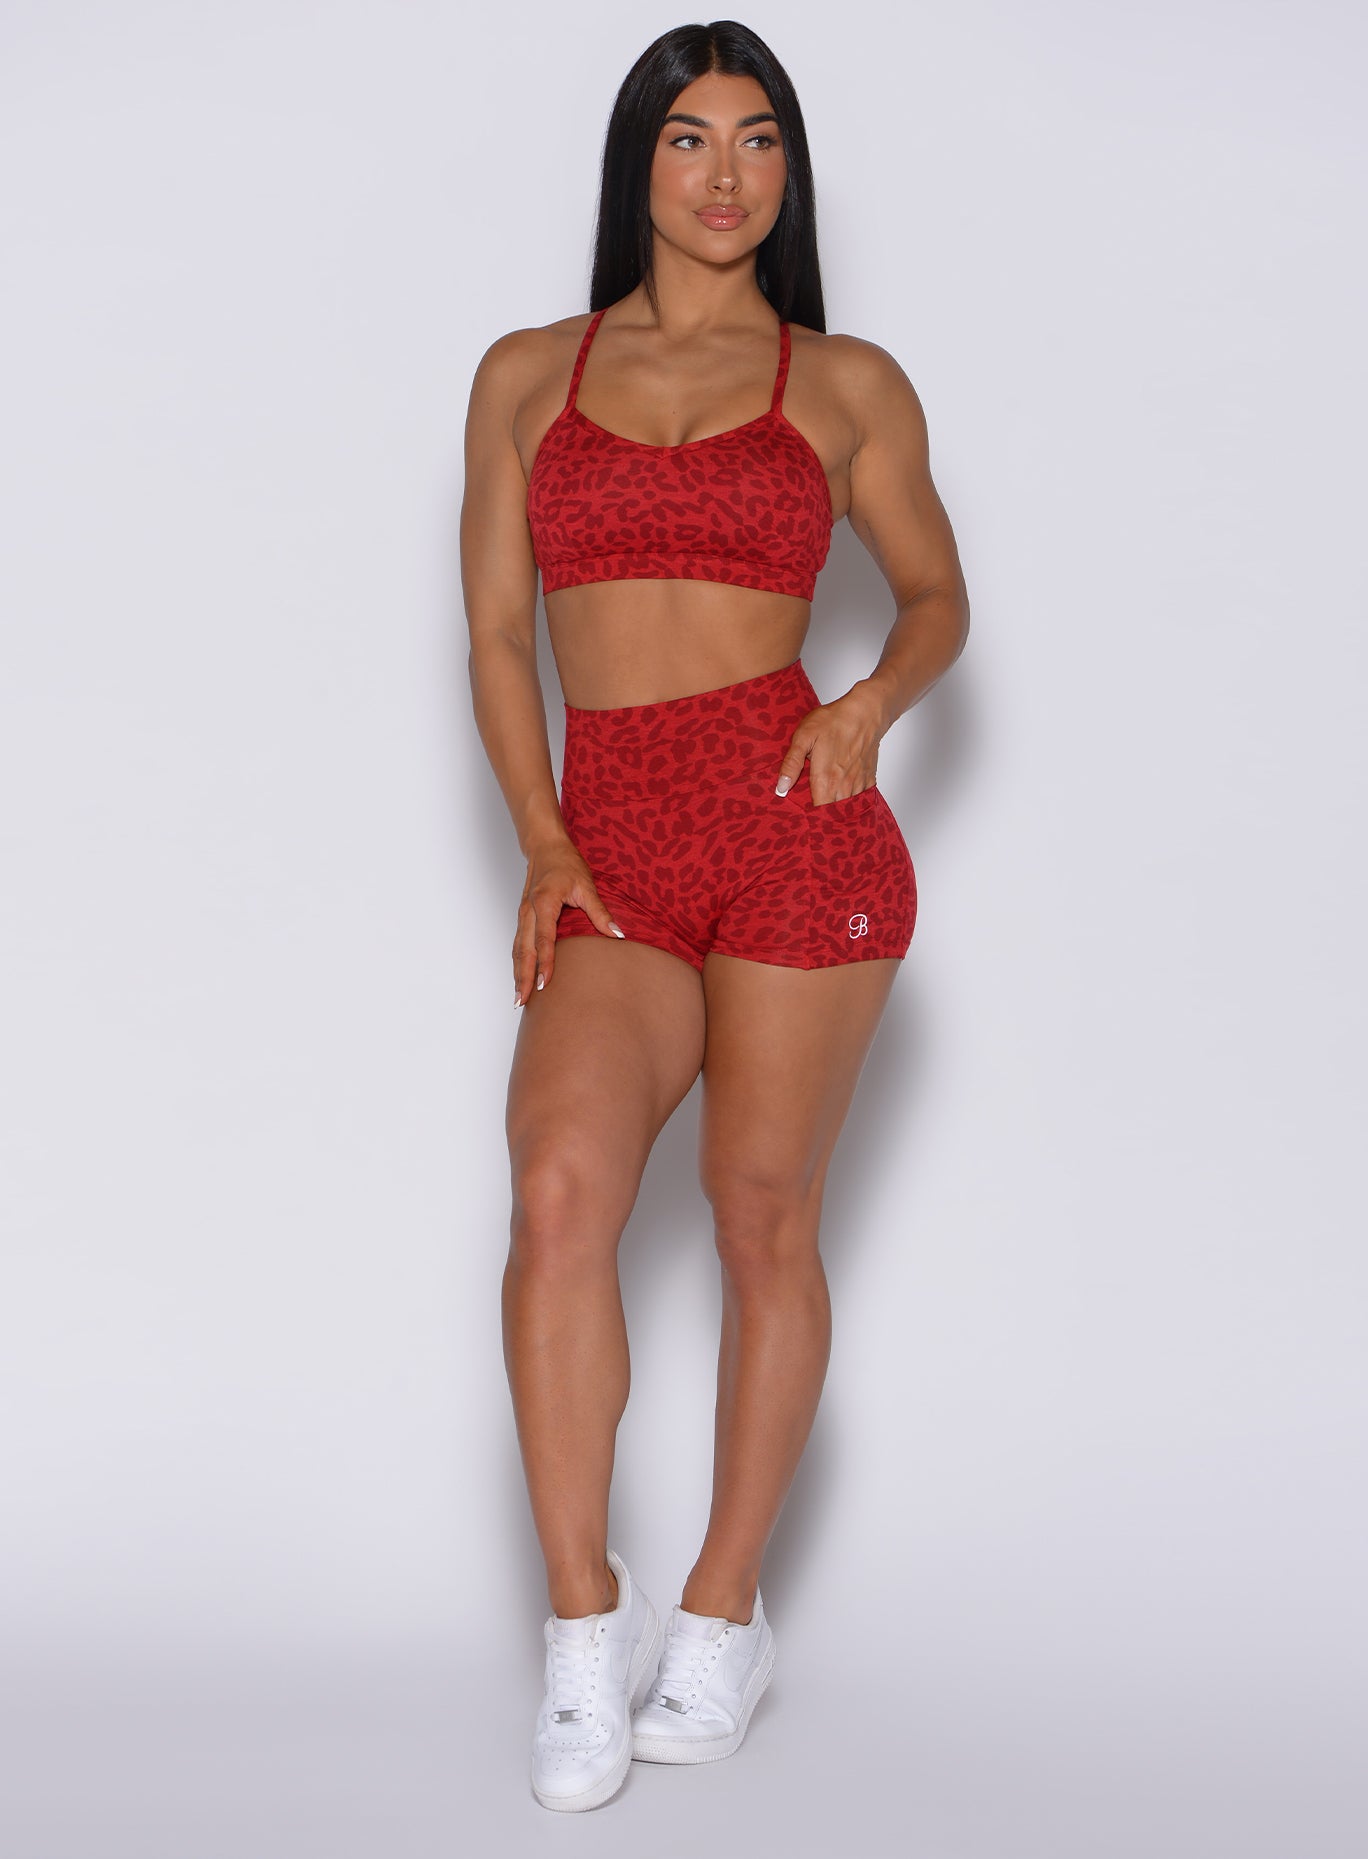 Front  profile view of a model with her left hand in pocket wearing our curves shorts in red cheetah color along with a matching bra